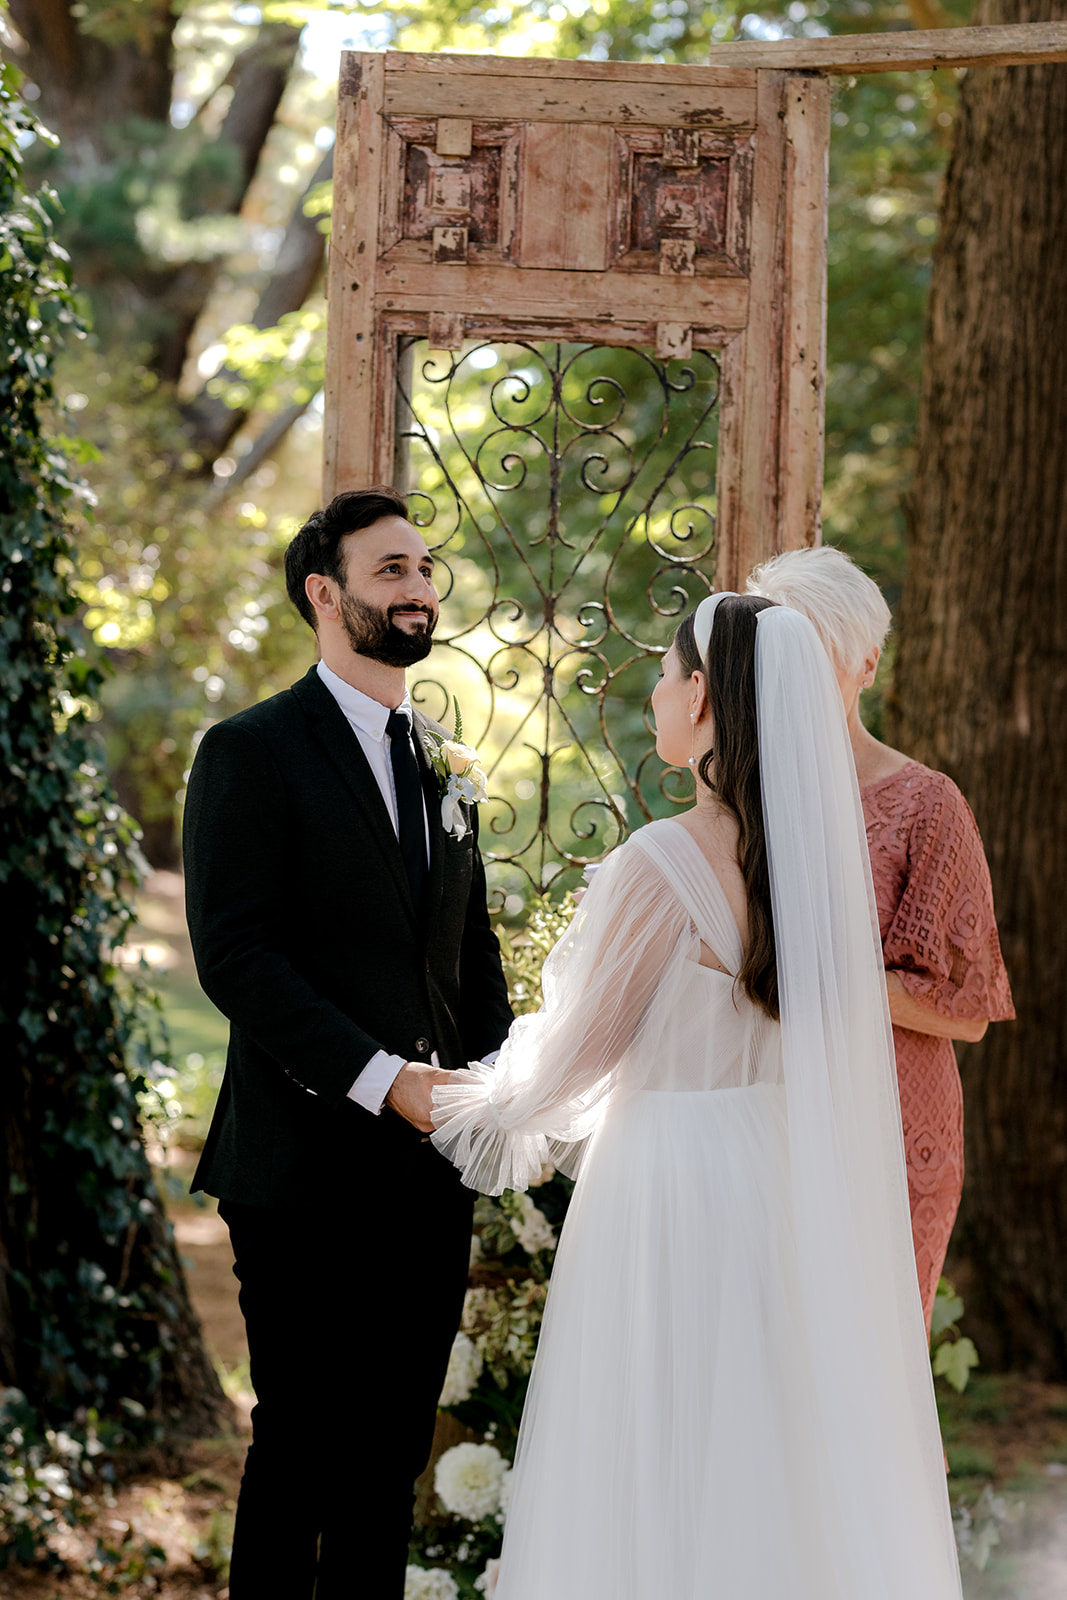 Portrait of bride & groom filled with joy at their elegant country wedding ceremony.